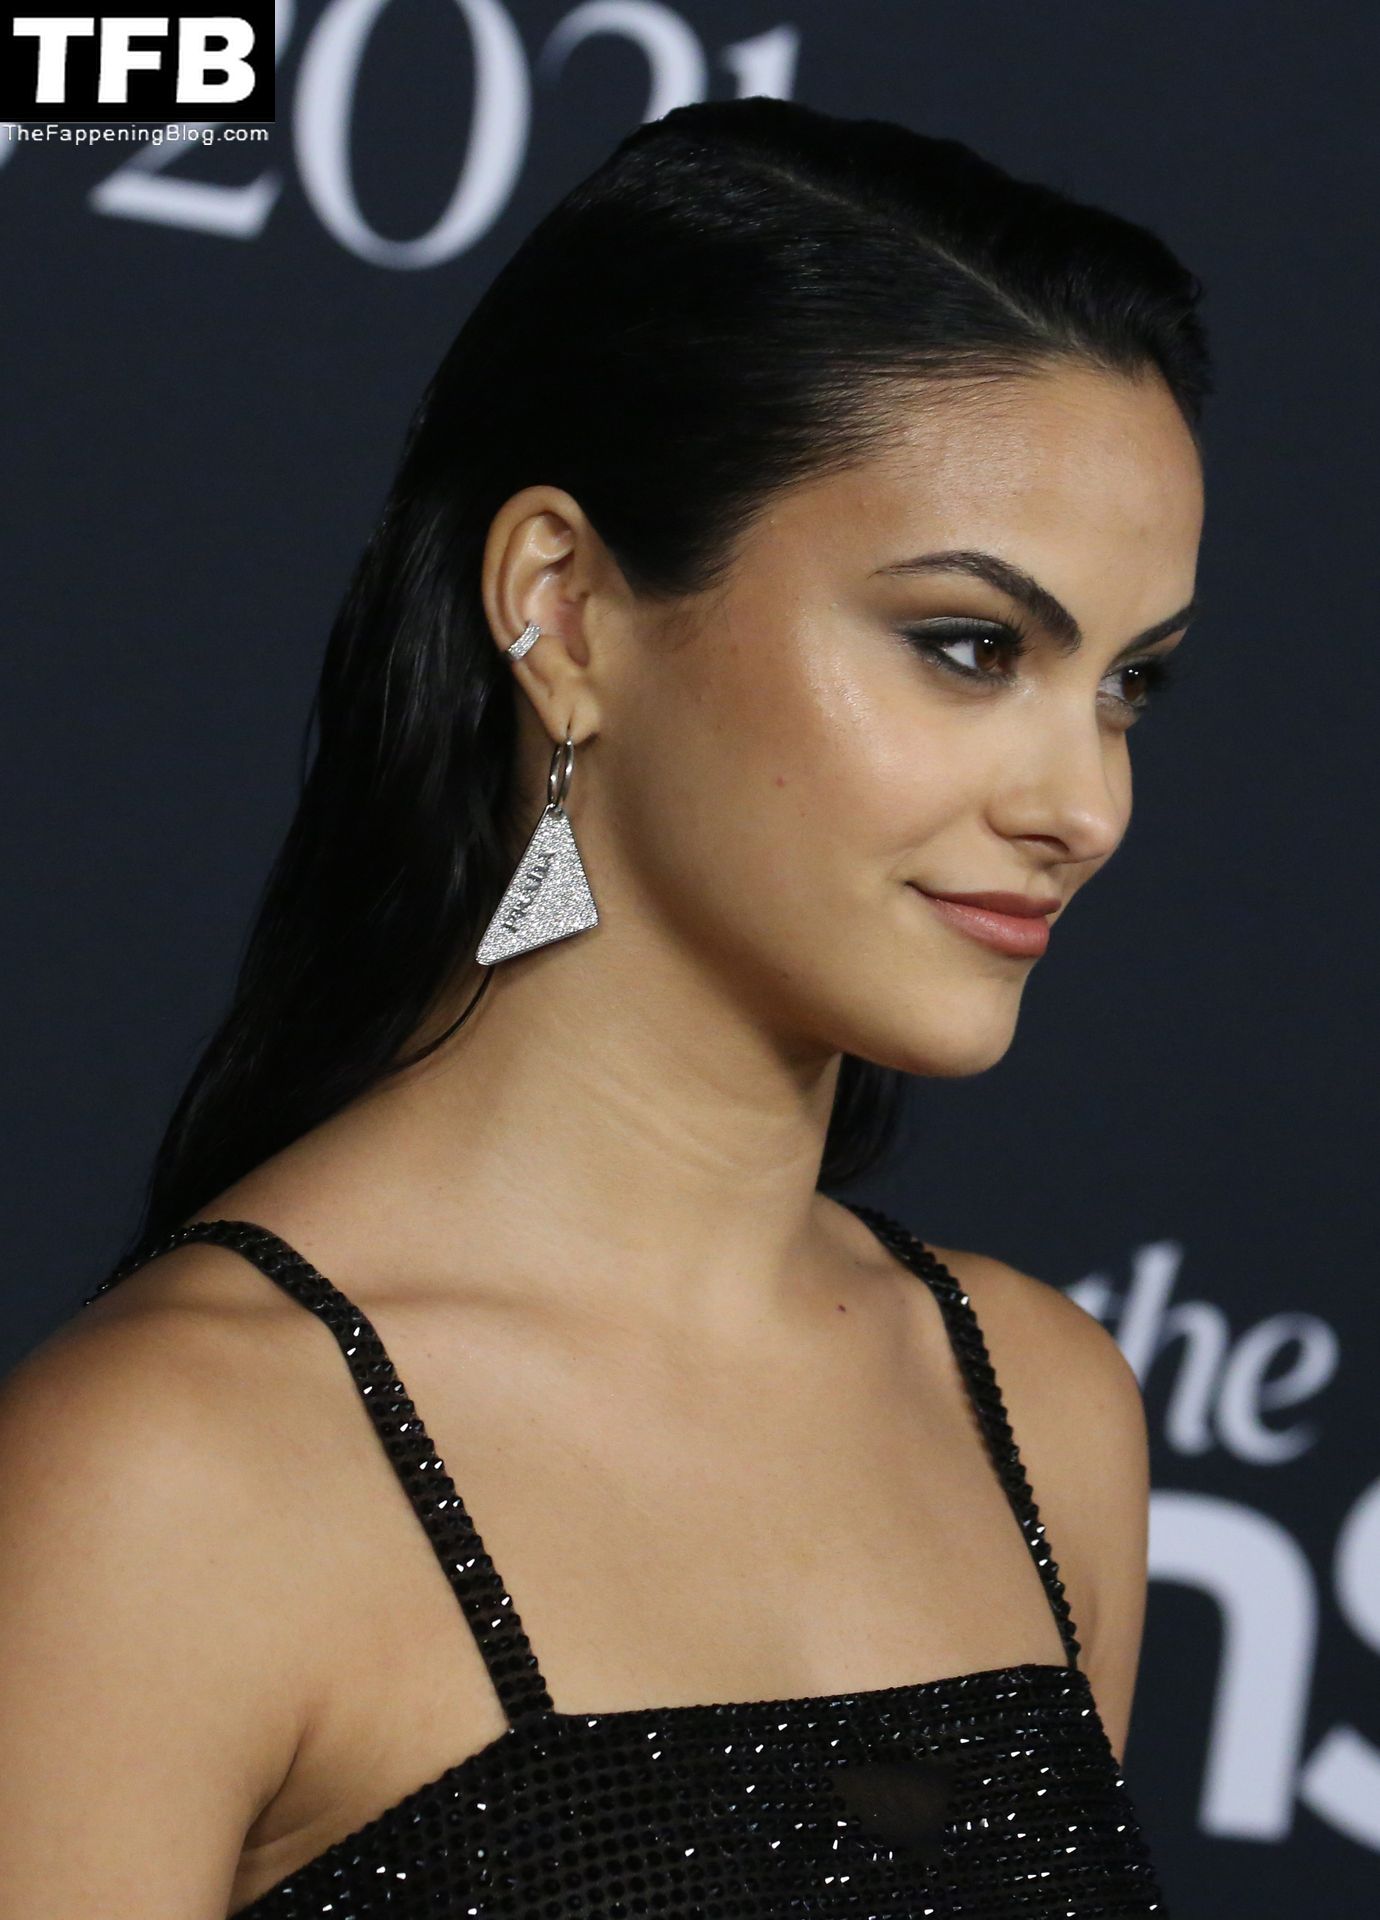 Camila-Mendes-See-Through-Tits-The-Fappening-Blog-89.jpg